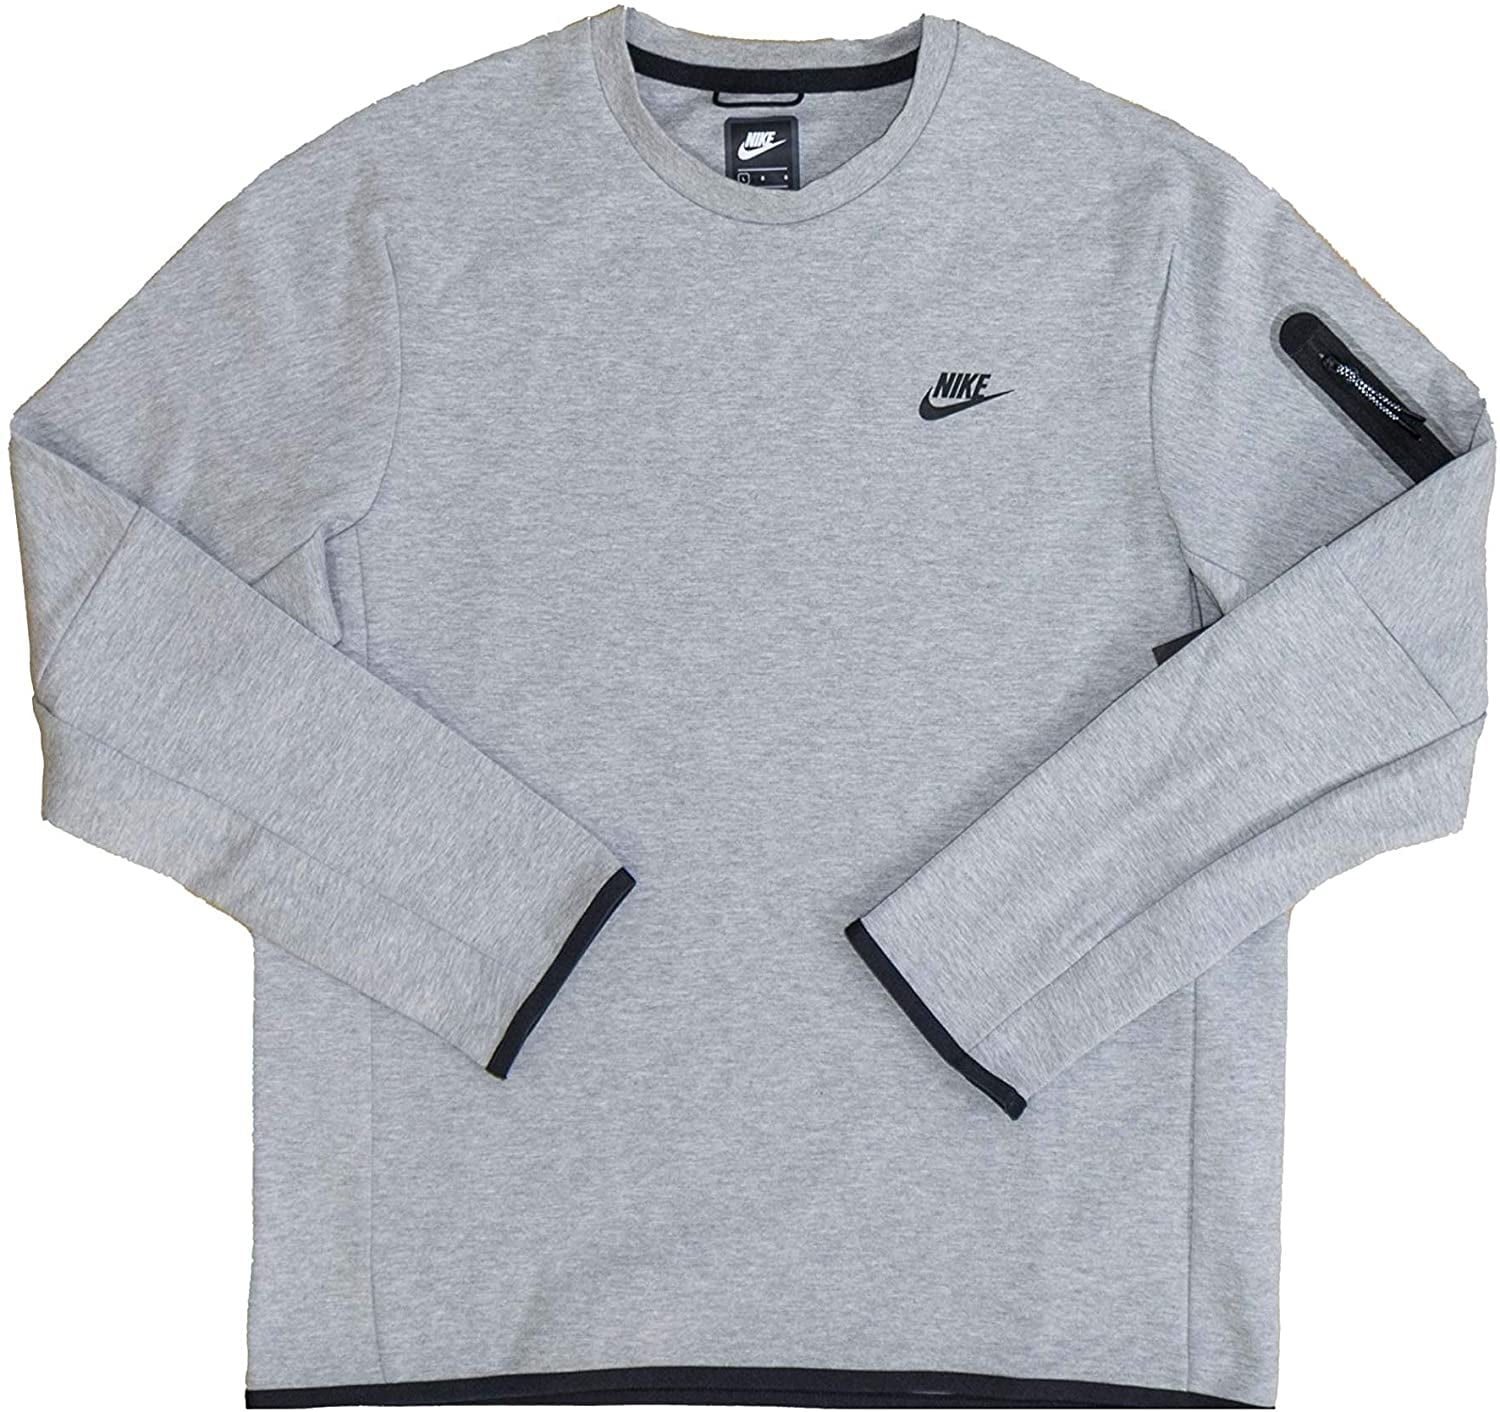 Nike Sportswear Tech Fleece Mens Crew Double-Sided Spacer Fabric for Added Without Extra Weight CU4505-063 Size M - Walmart.com